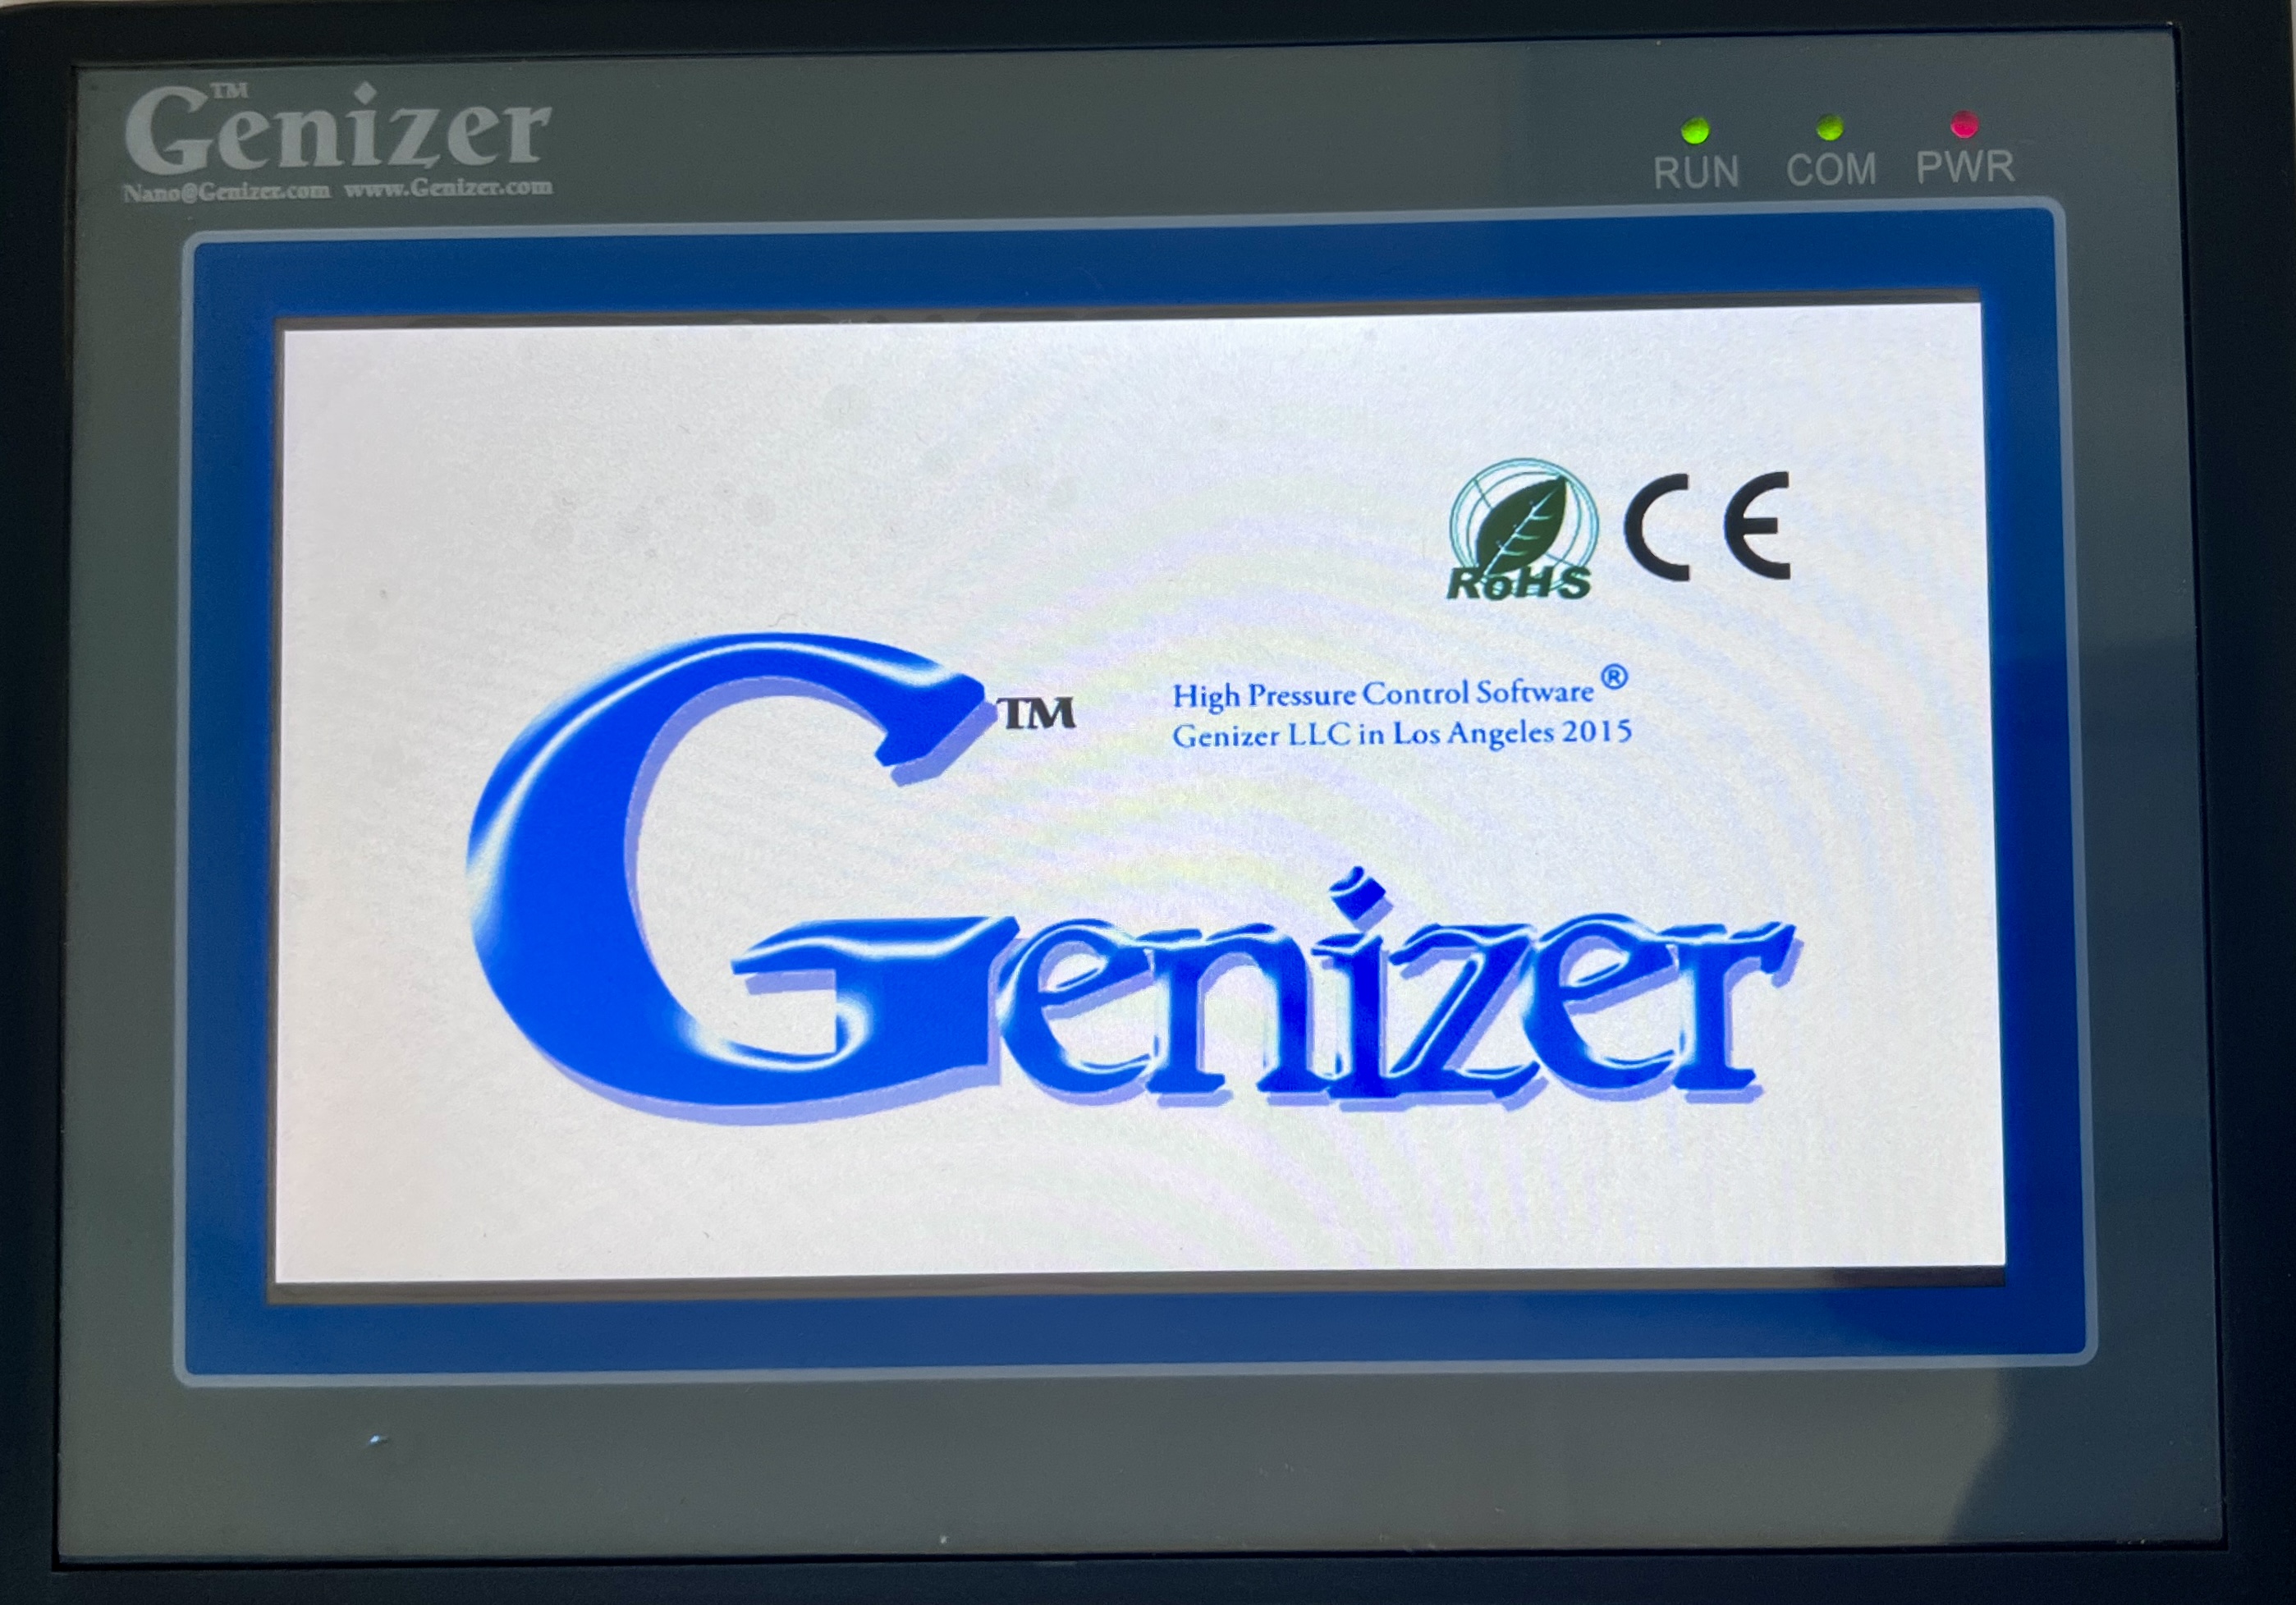 Photo of Genizer's PLC Touch Screen with Genizer's logo on the front.